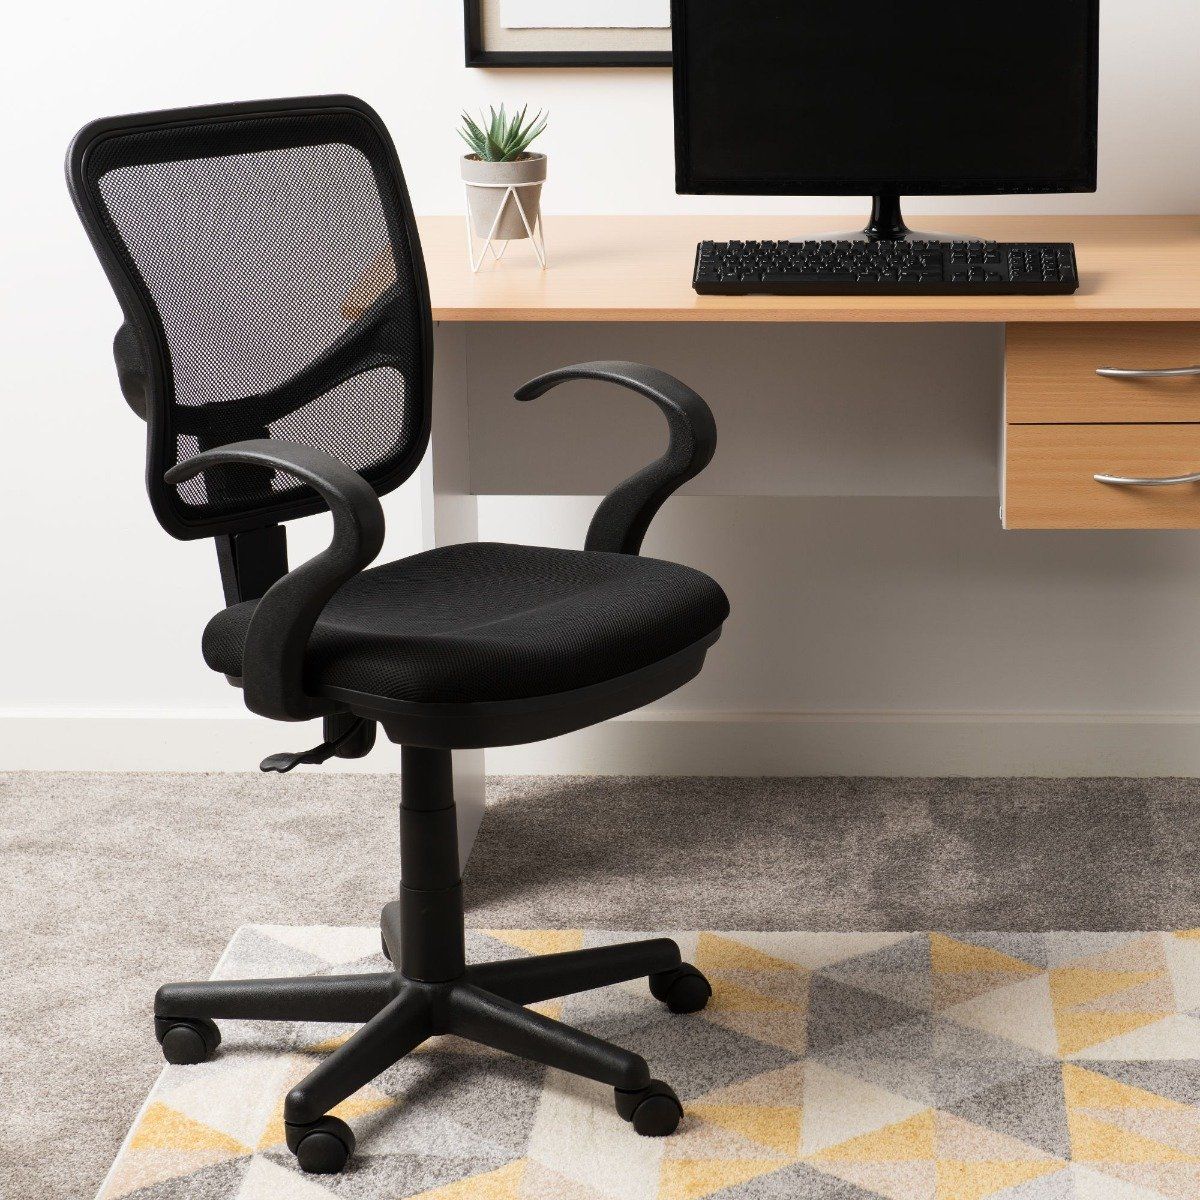 Stylish and comforable computer chair boasting a black finish. 

Height: 61.5cm
Width: 93.5cm
Finish: Foam
Material: Black

Combine comfort and style with the Clifton computer chair. Designed with your back in mind - the chair boasts a foamed seat and mesh back. The perfect addition to your home office, bedroom and livingroom.